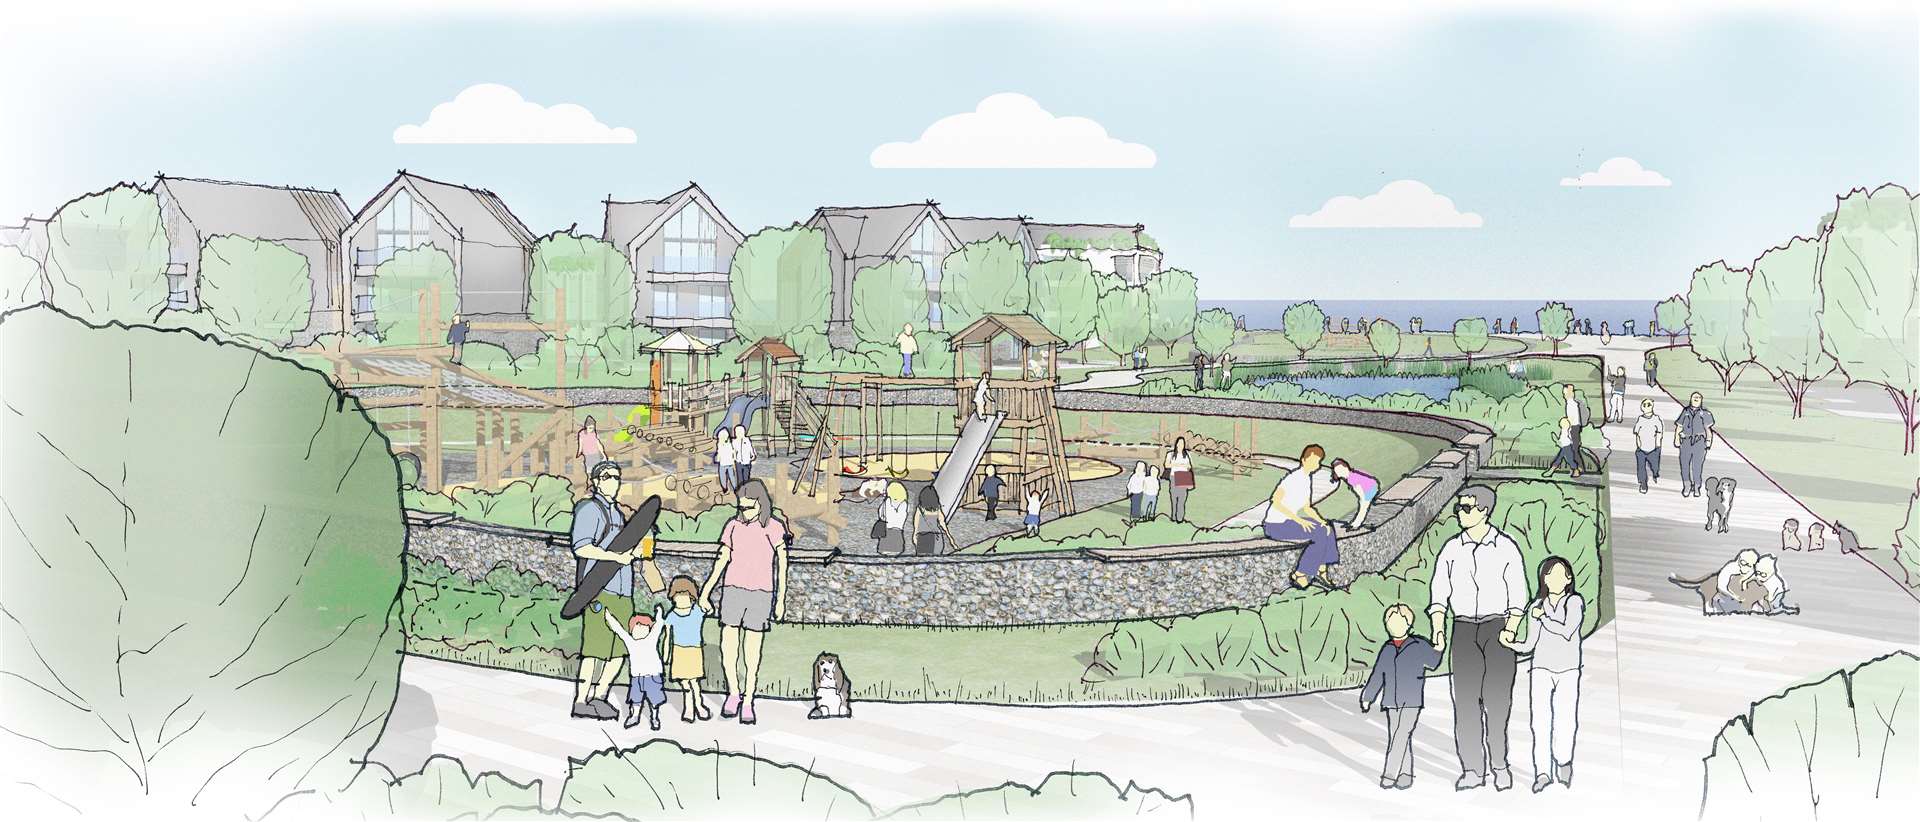 A children's play park is planned as part of the development